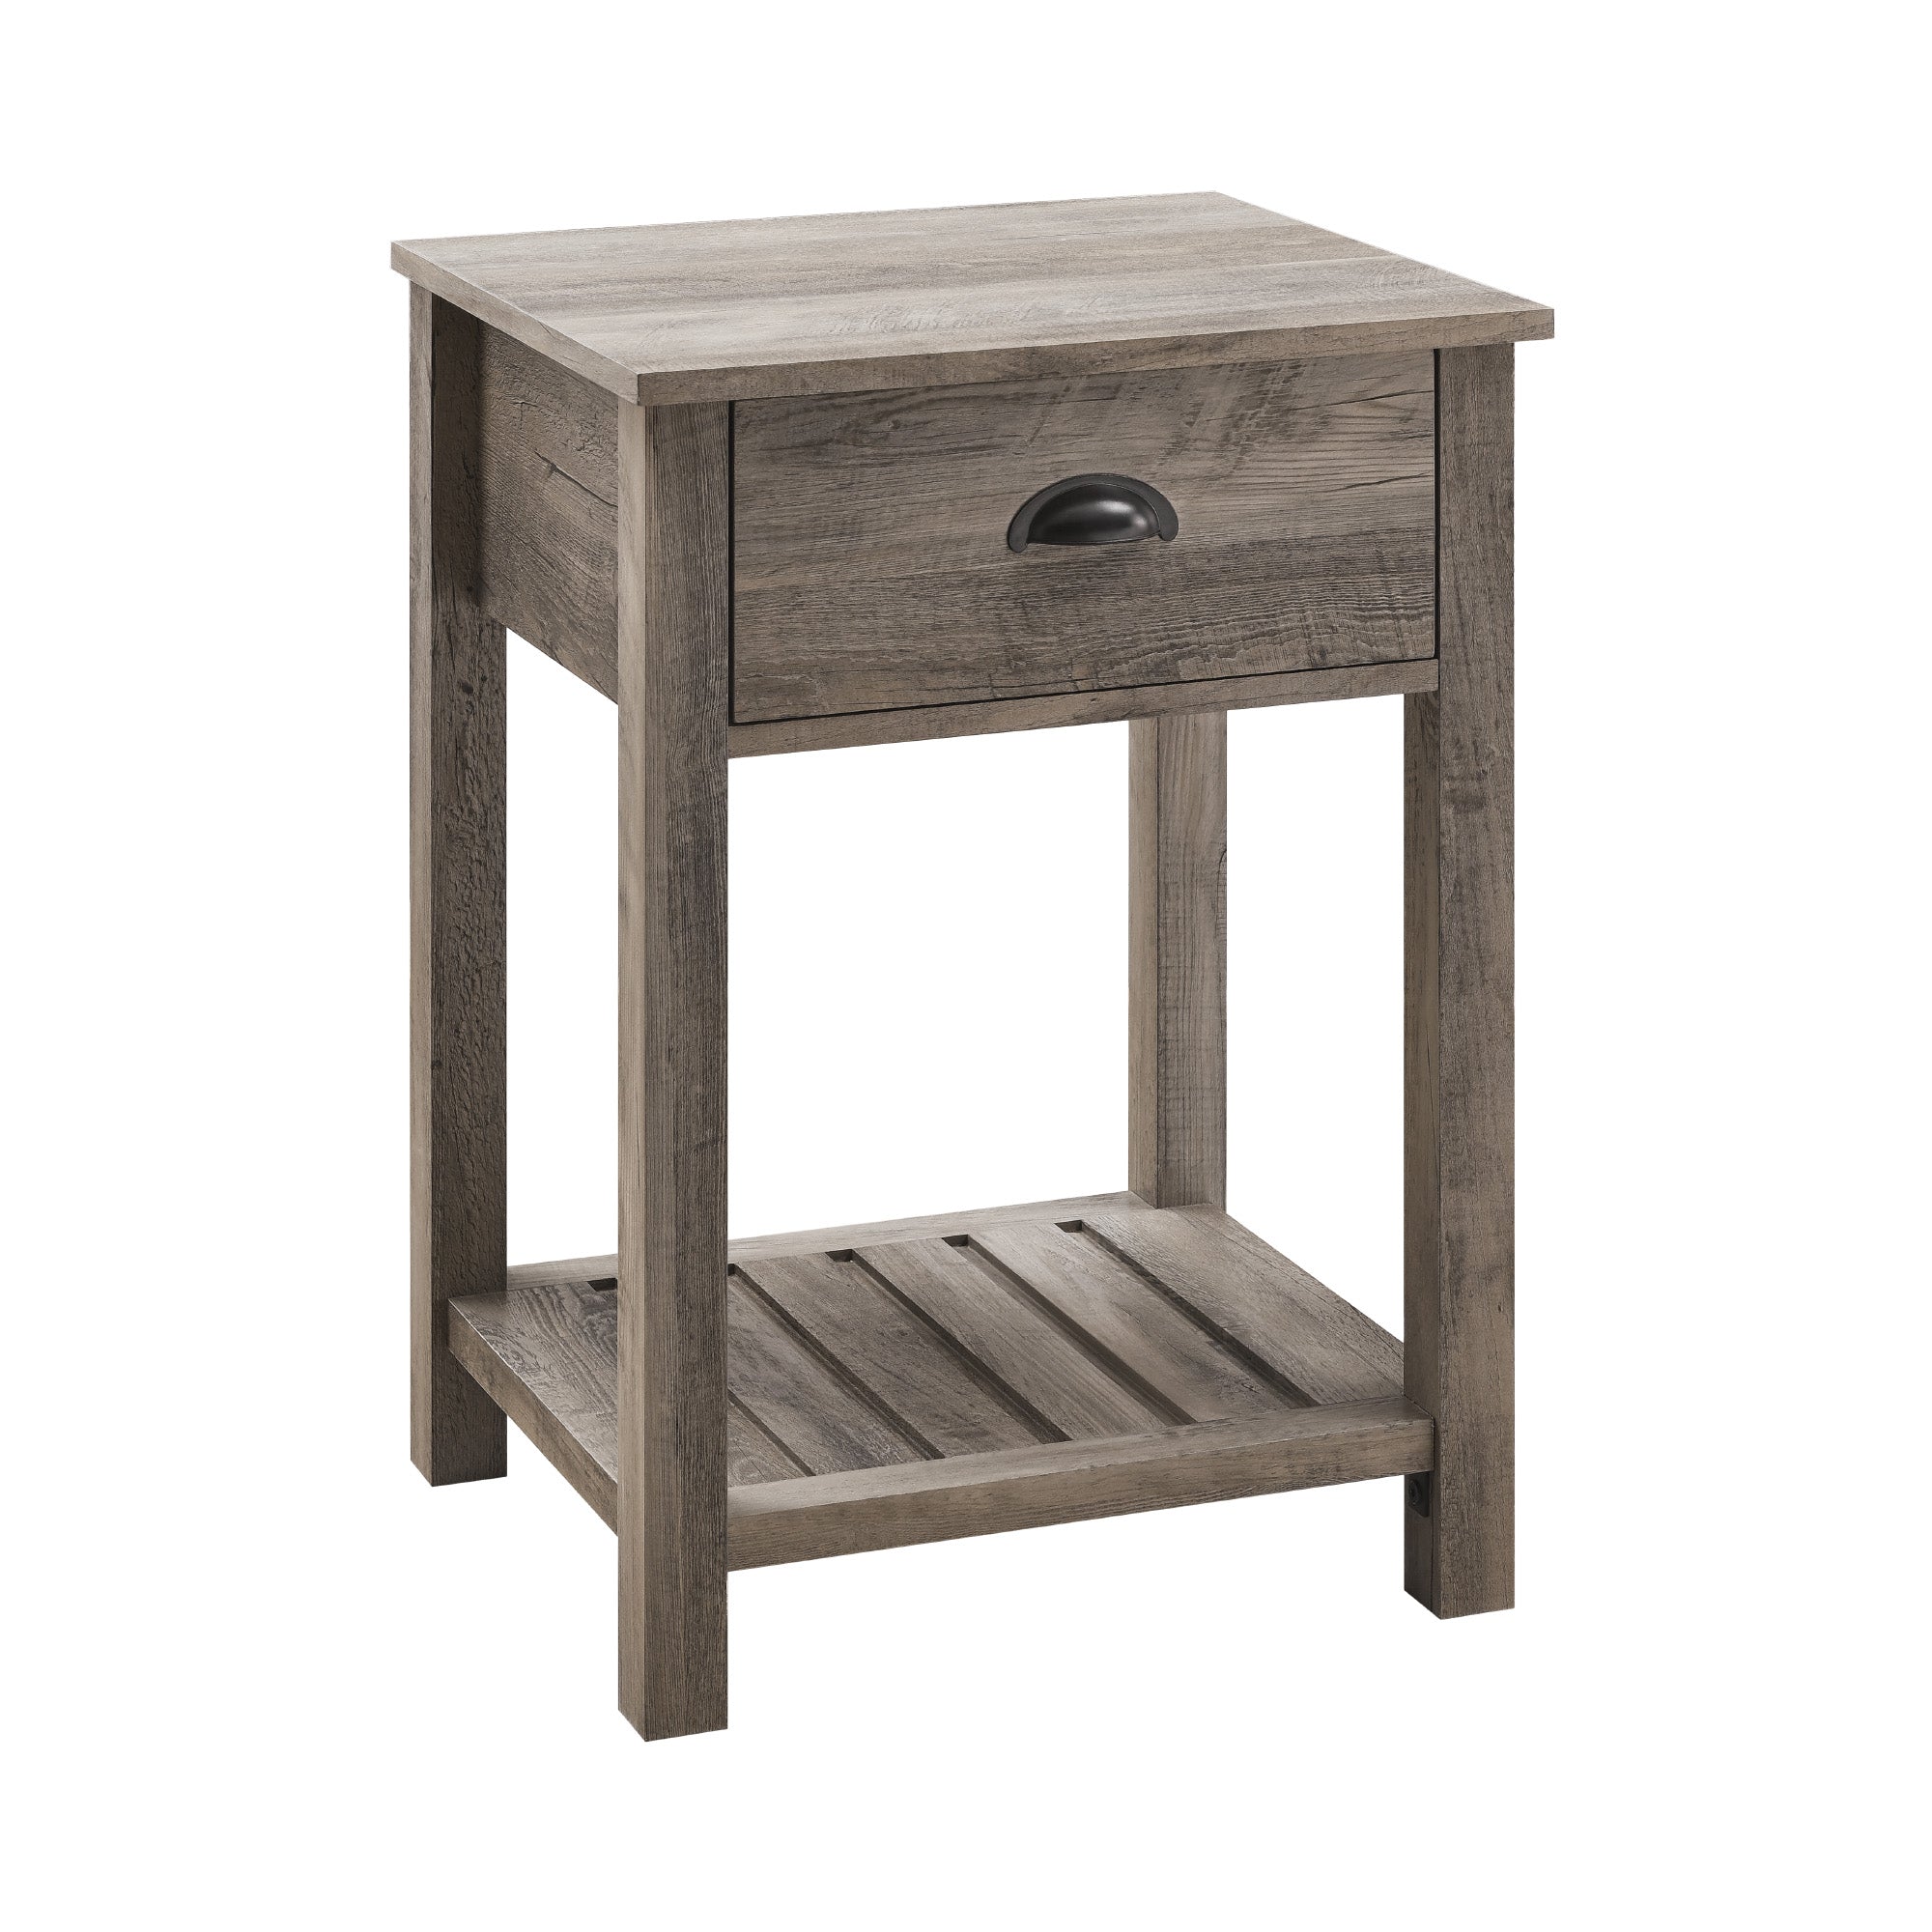 18" Country Single Drawer Nightstand - East Shore Modern Home Furnishings